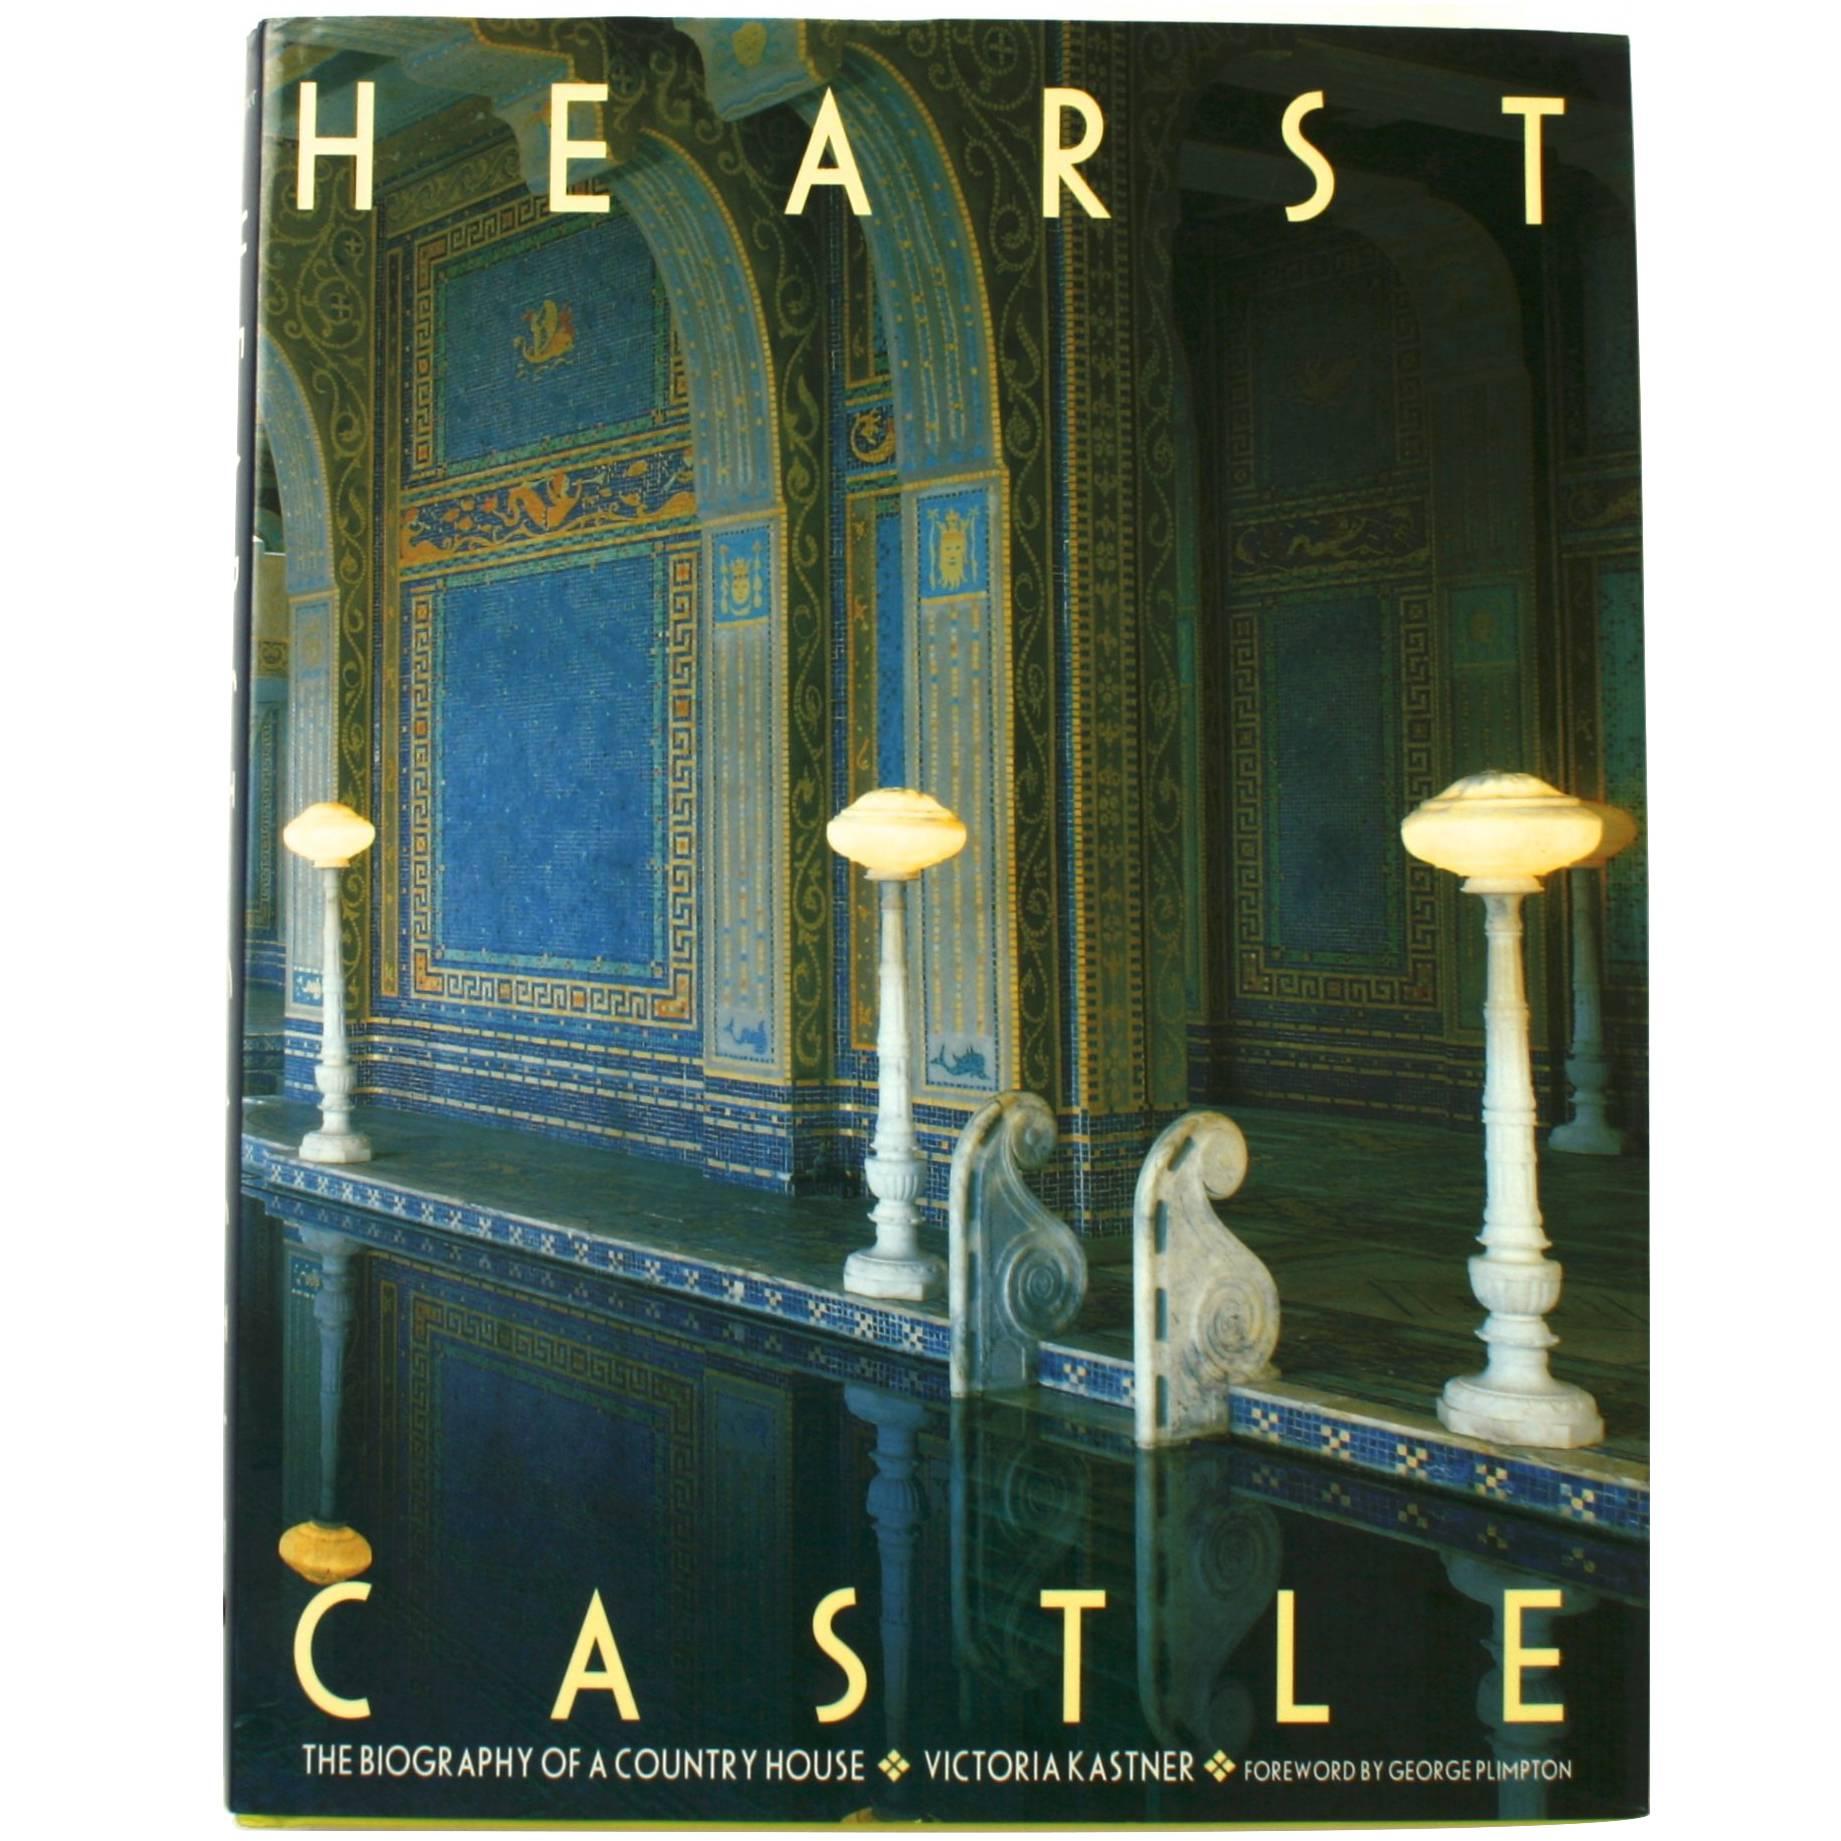 Hearst Castle, a Biography of a Country House by Victoria Kastner